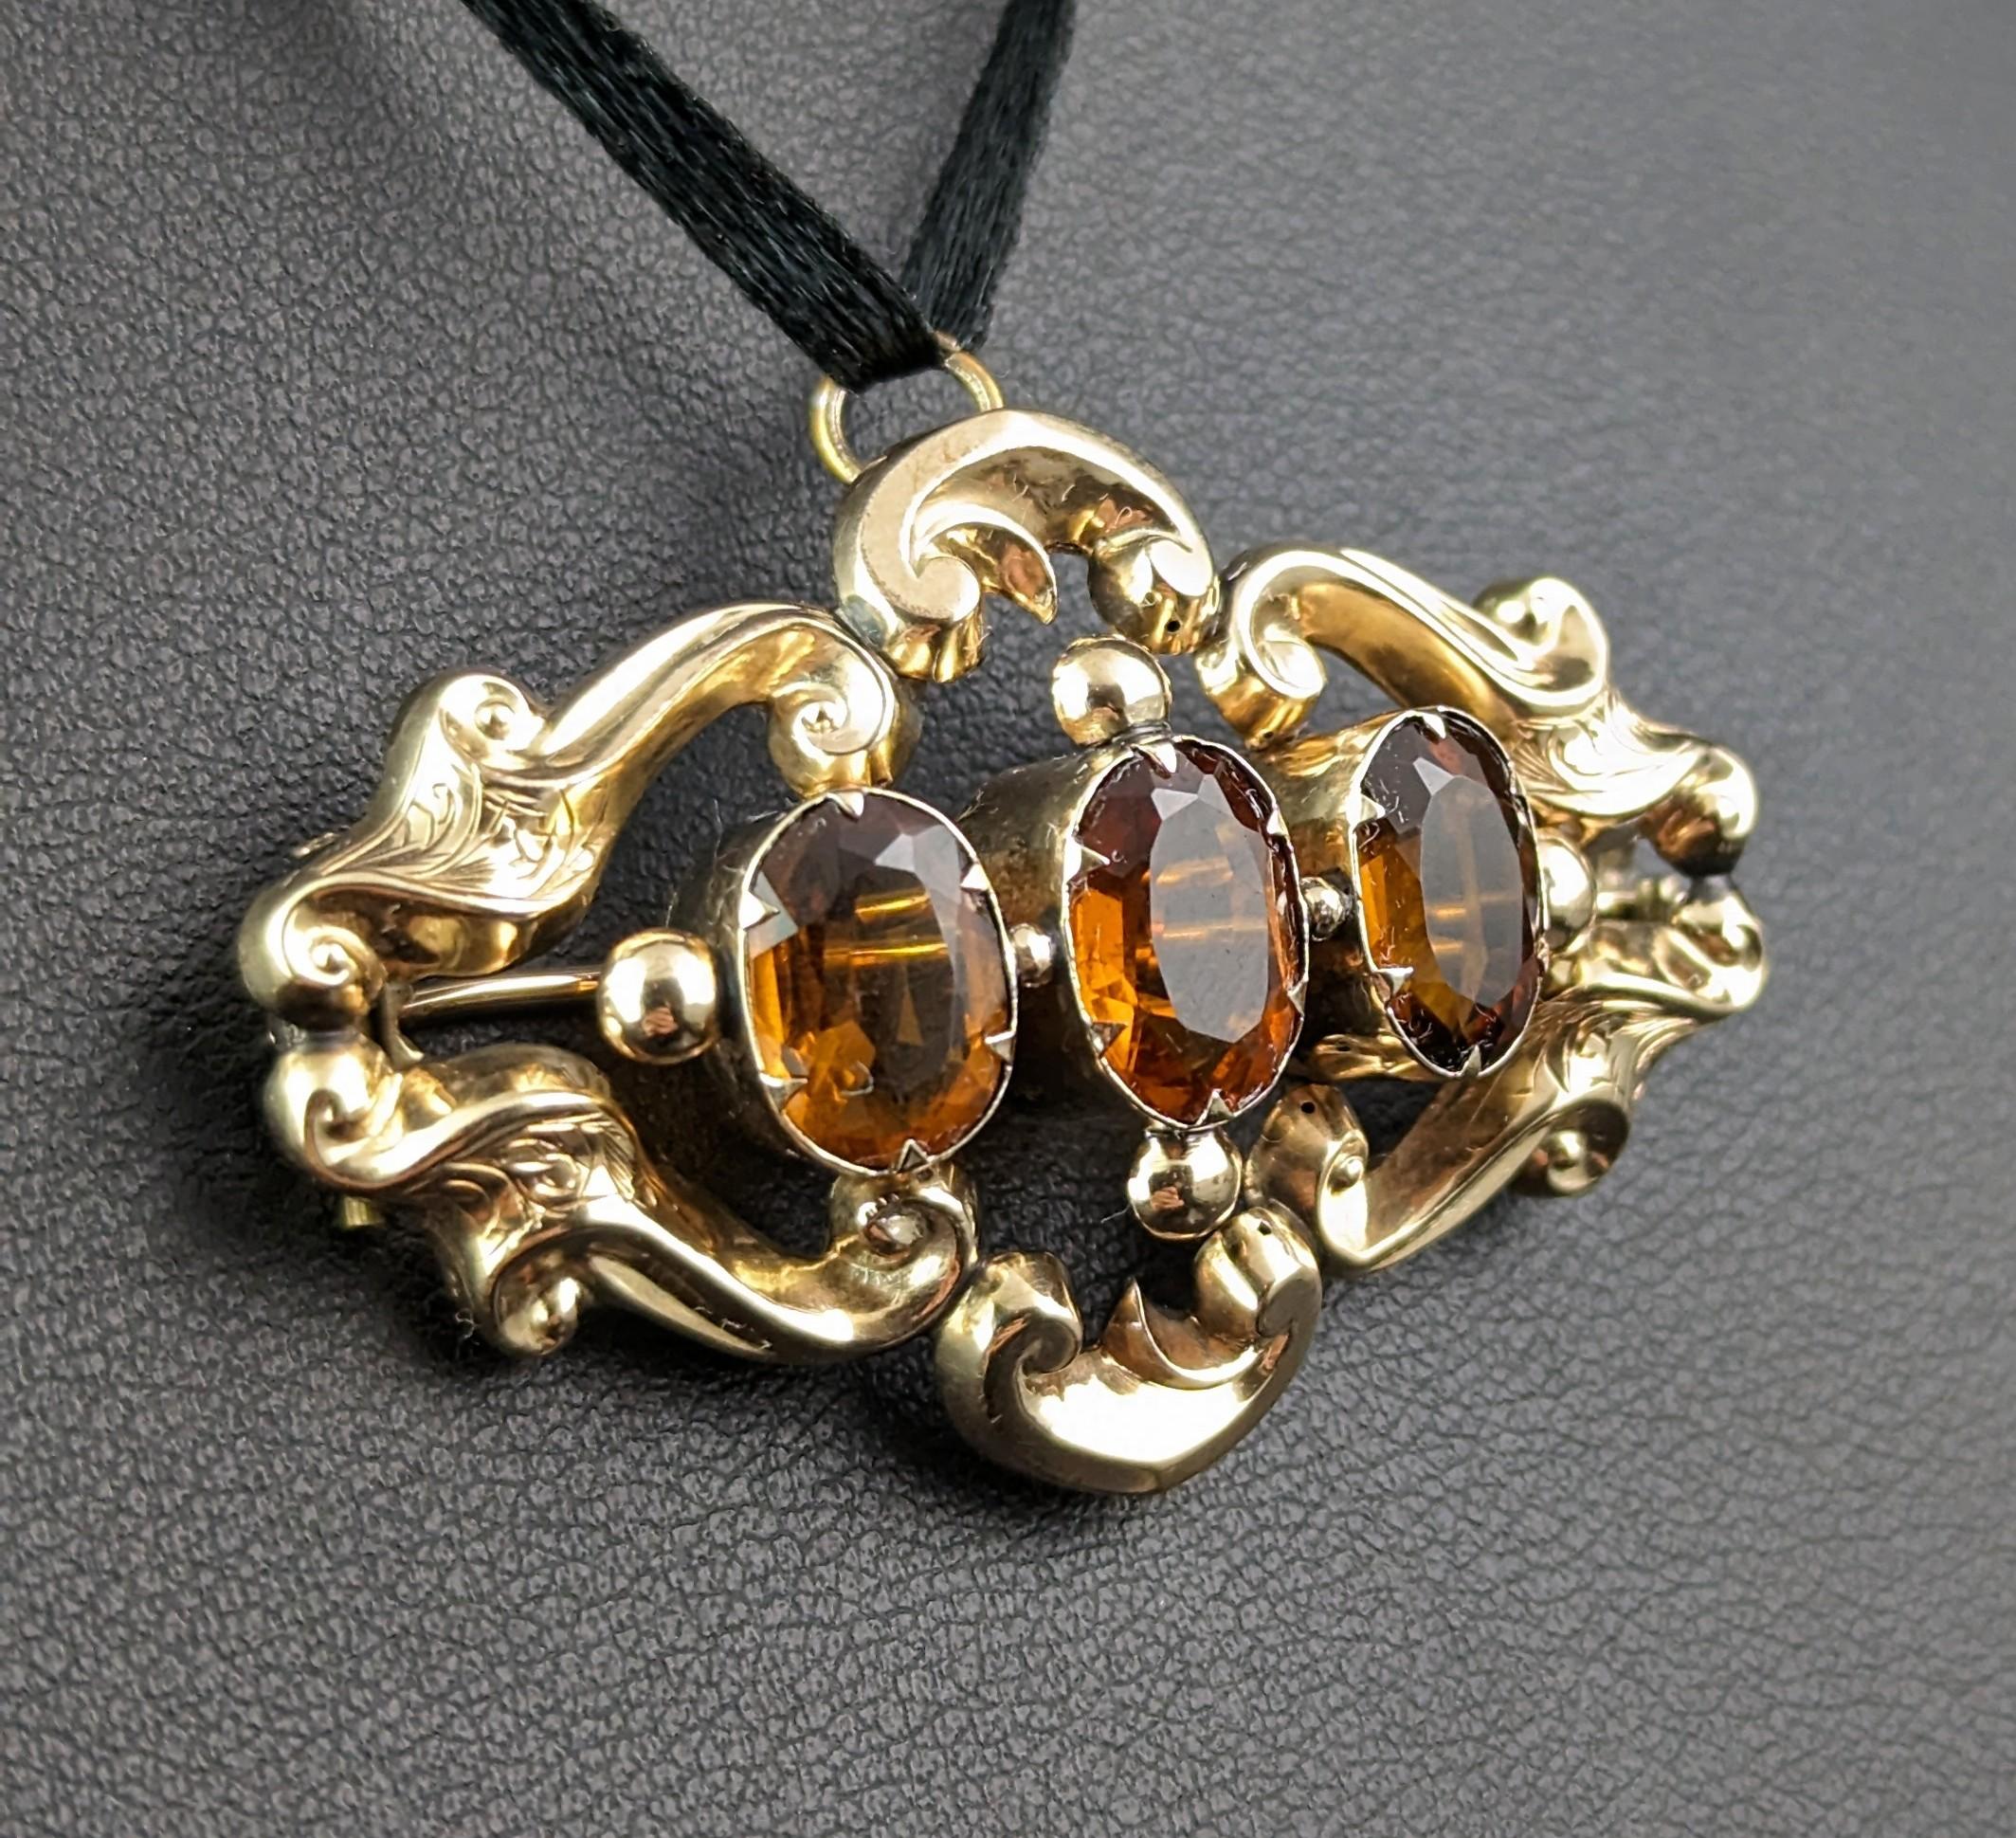 A gorgeous antique Citrine pendant brooch.

This pretty piece is designed in 9ct yellow gold with a scrollwork design in rich tones, the pendant brooch is set with three oval cut citrine's with a lovely warm cognac glow.

The brooch fastens with an